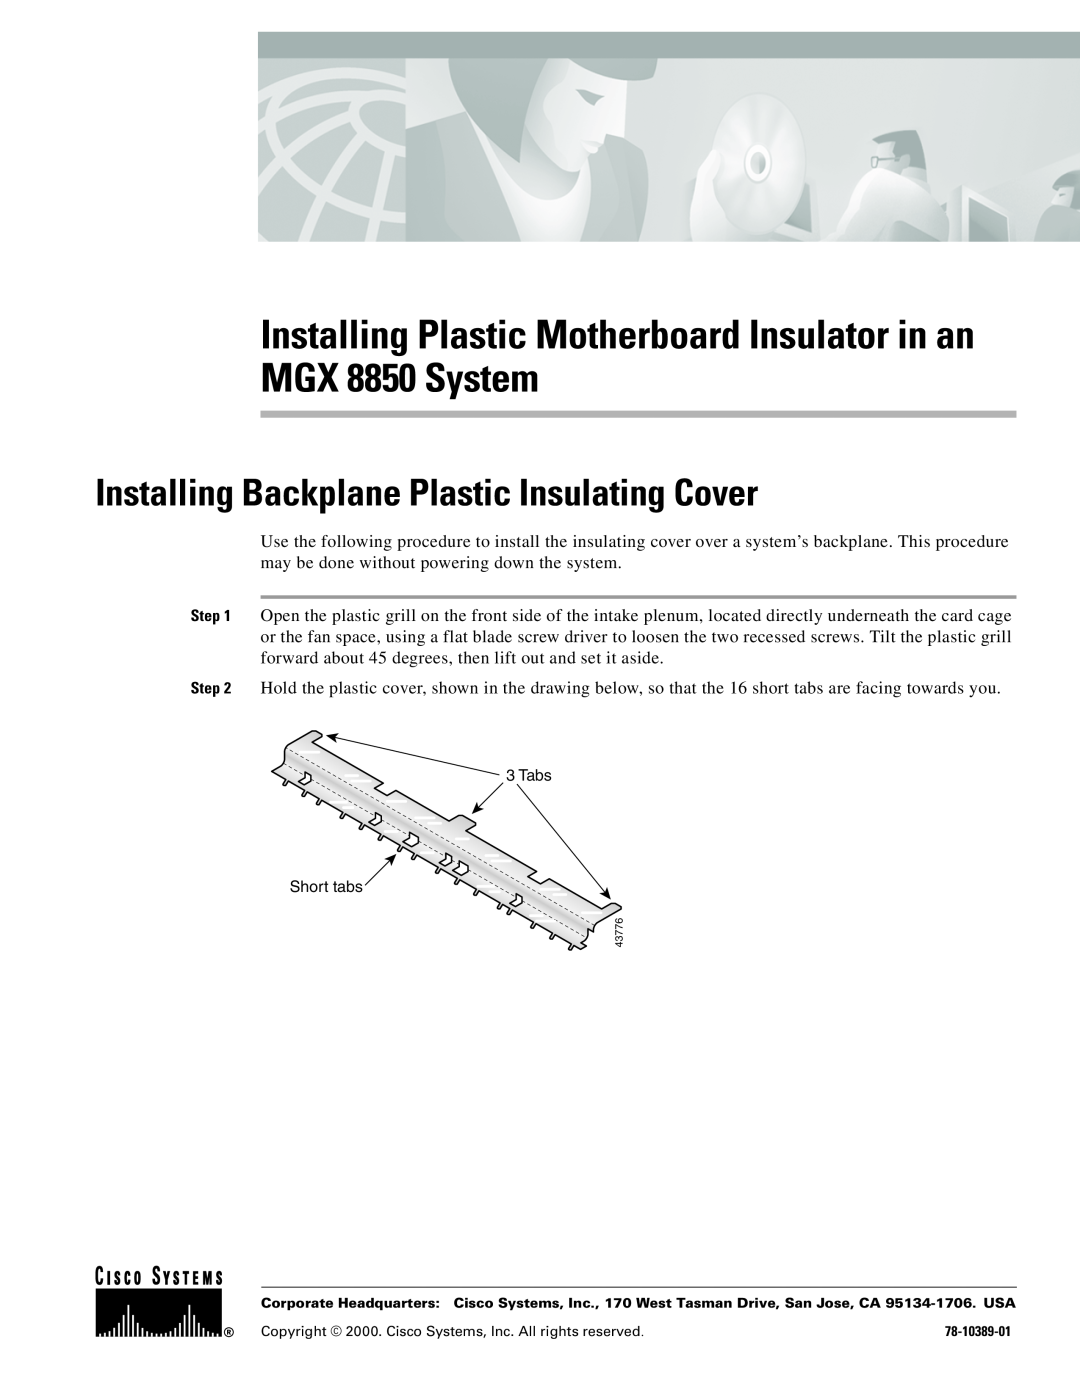 Cisco Systems manual Installing Plastic Motherboard Insulator in an MGX 8850 System 